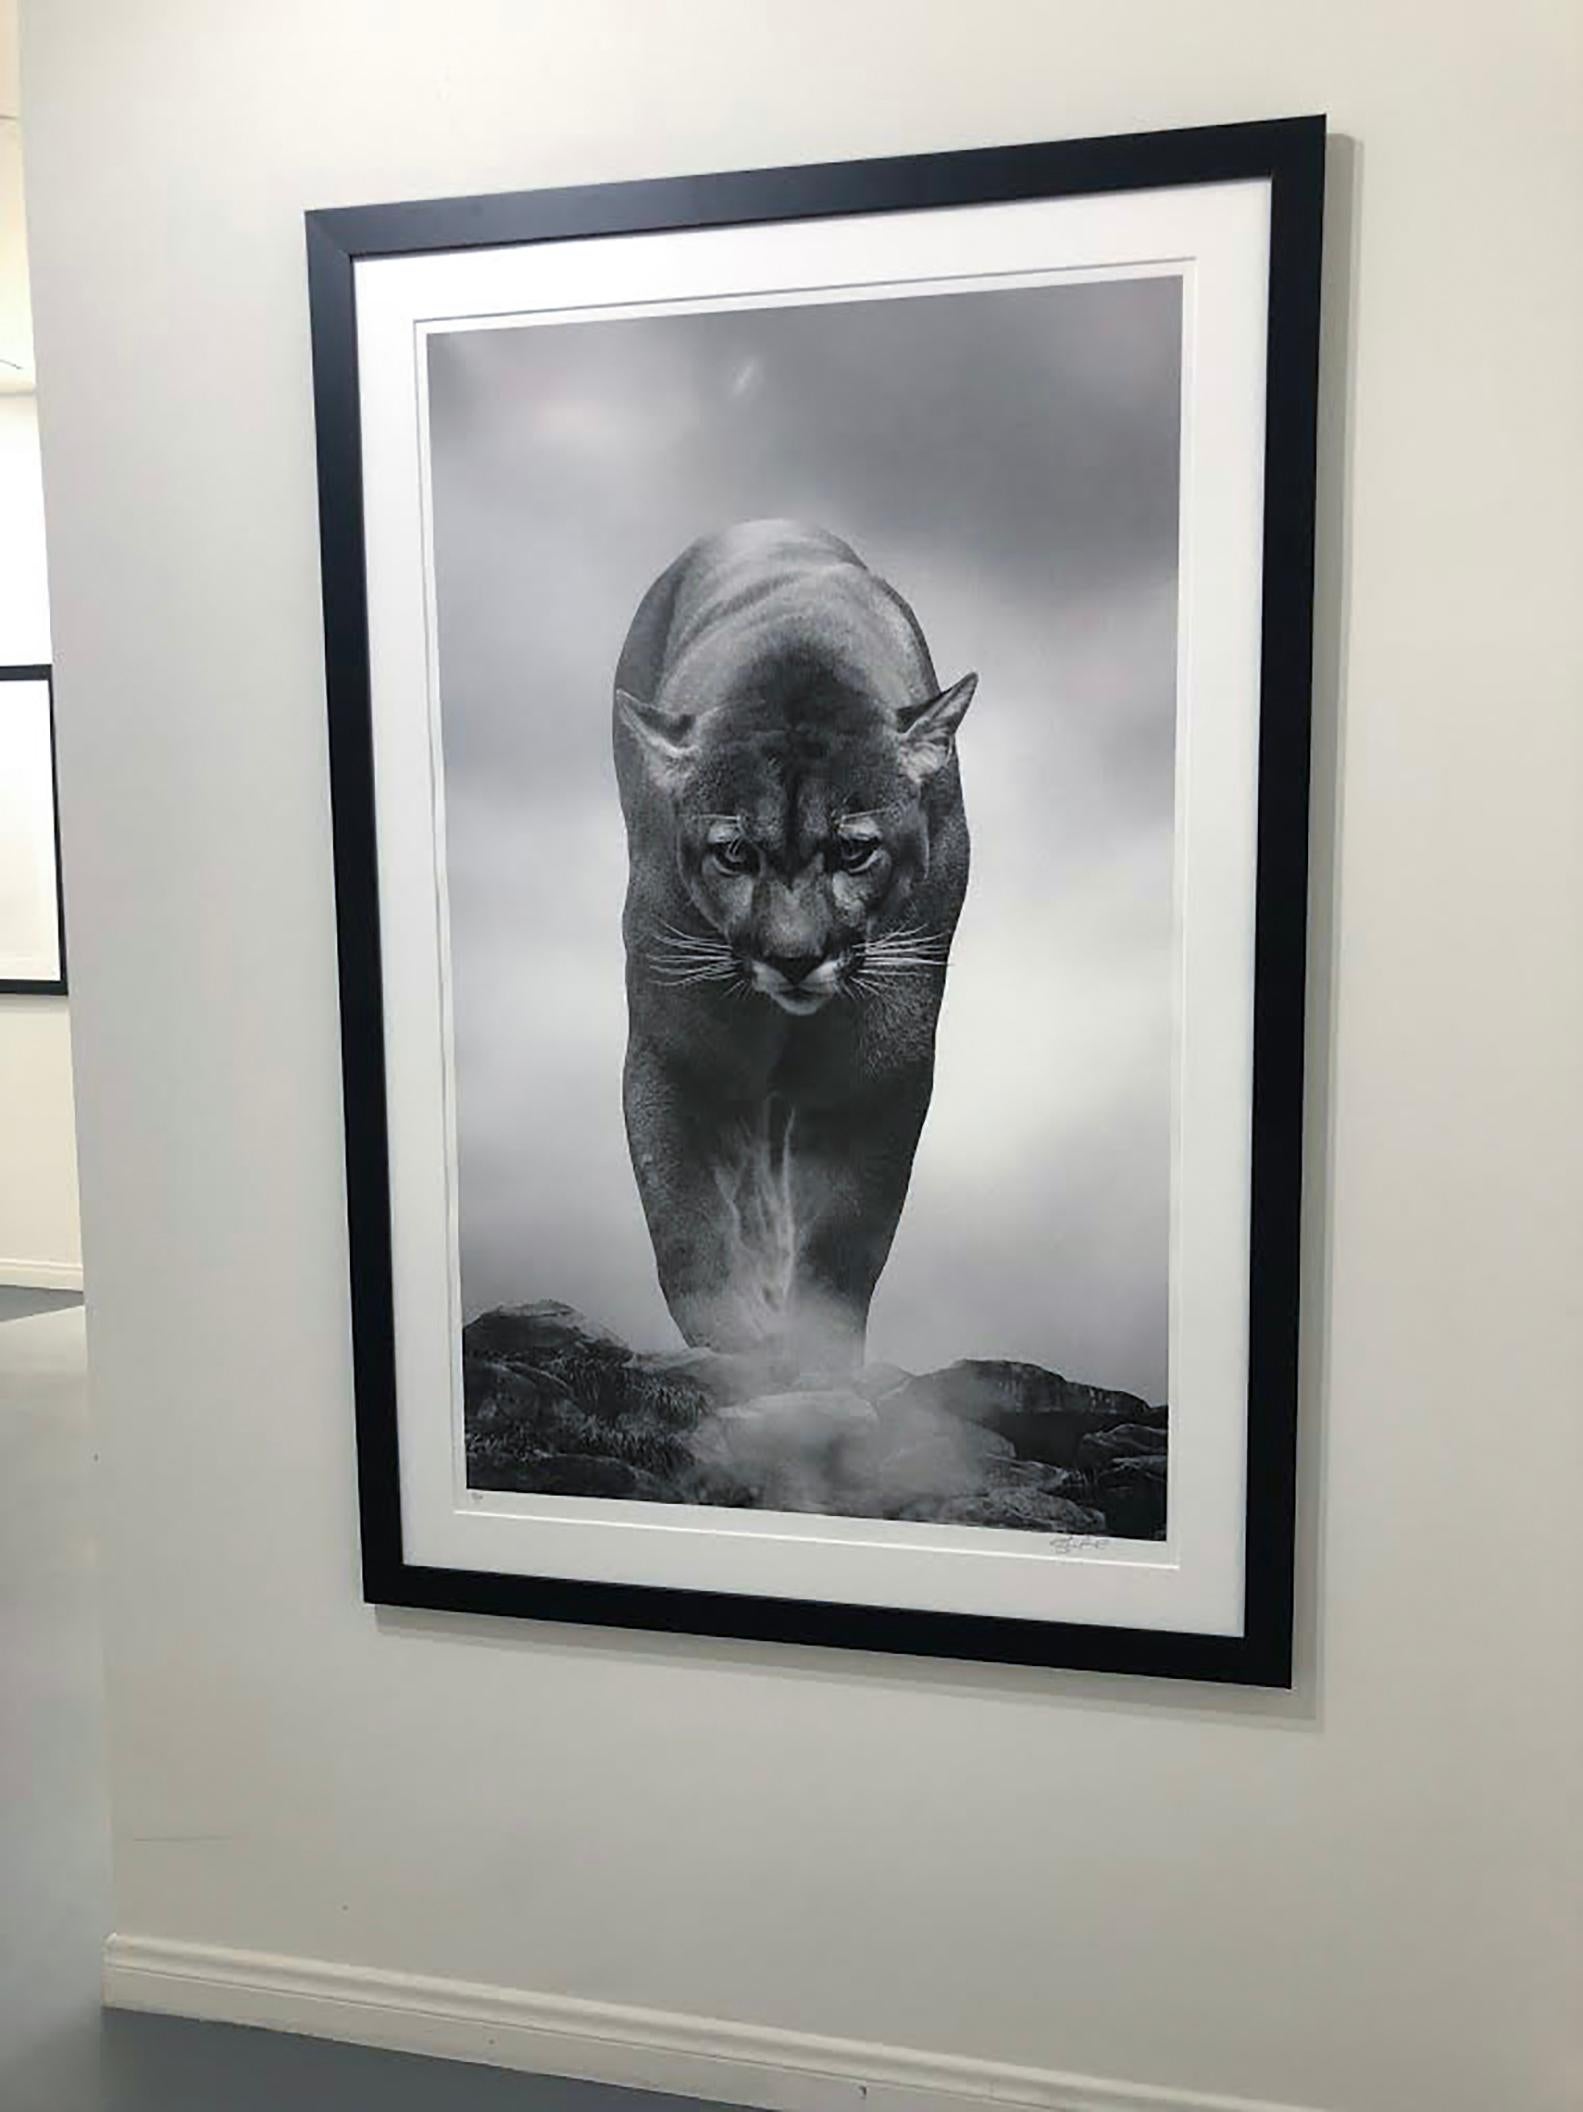 King of the Mountain 40x60  Black & White Photography, Cougar, Mountain Lion  - Print by Shane Russeck